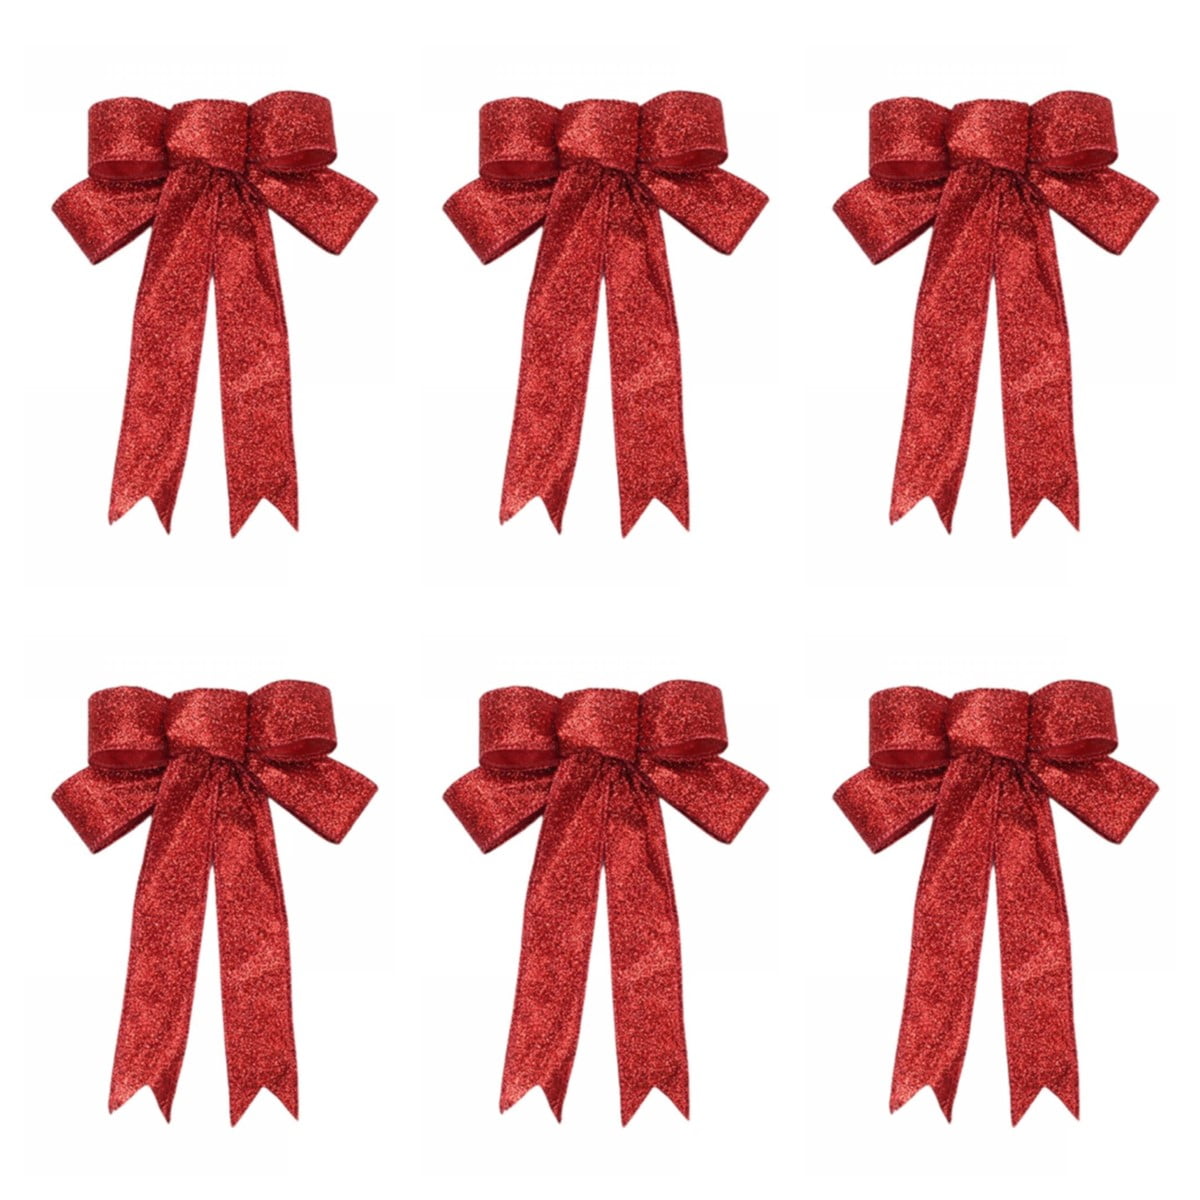 Nine Different Red Ribbons Bows Styles On White Background High